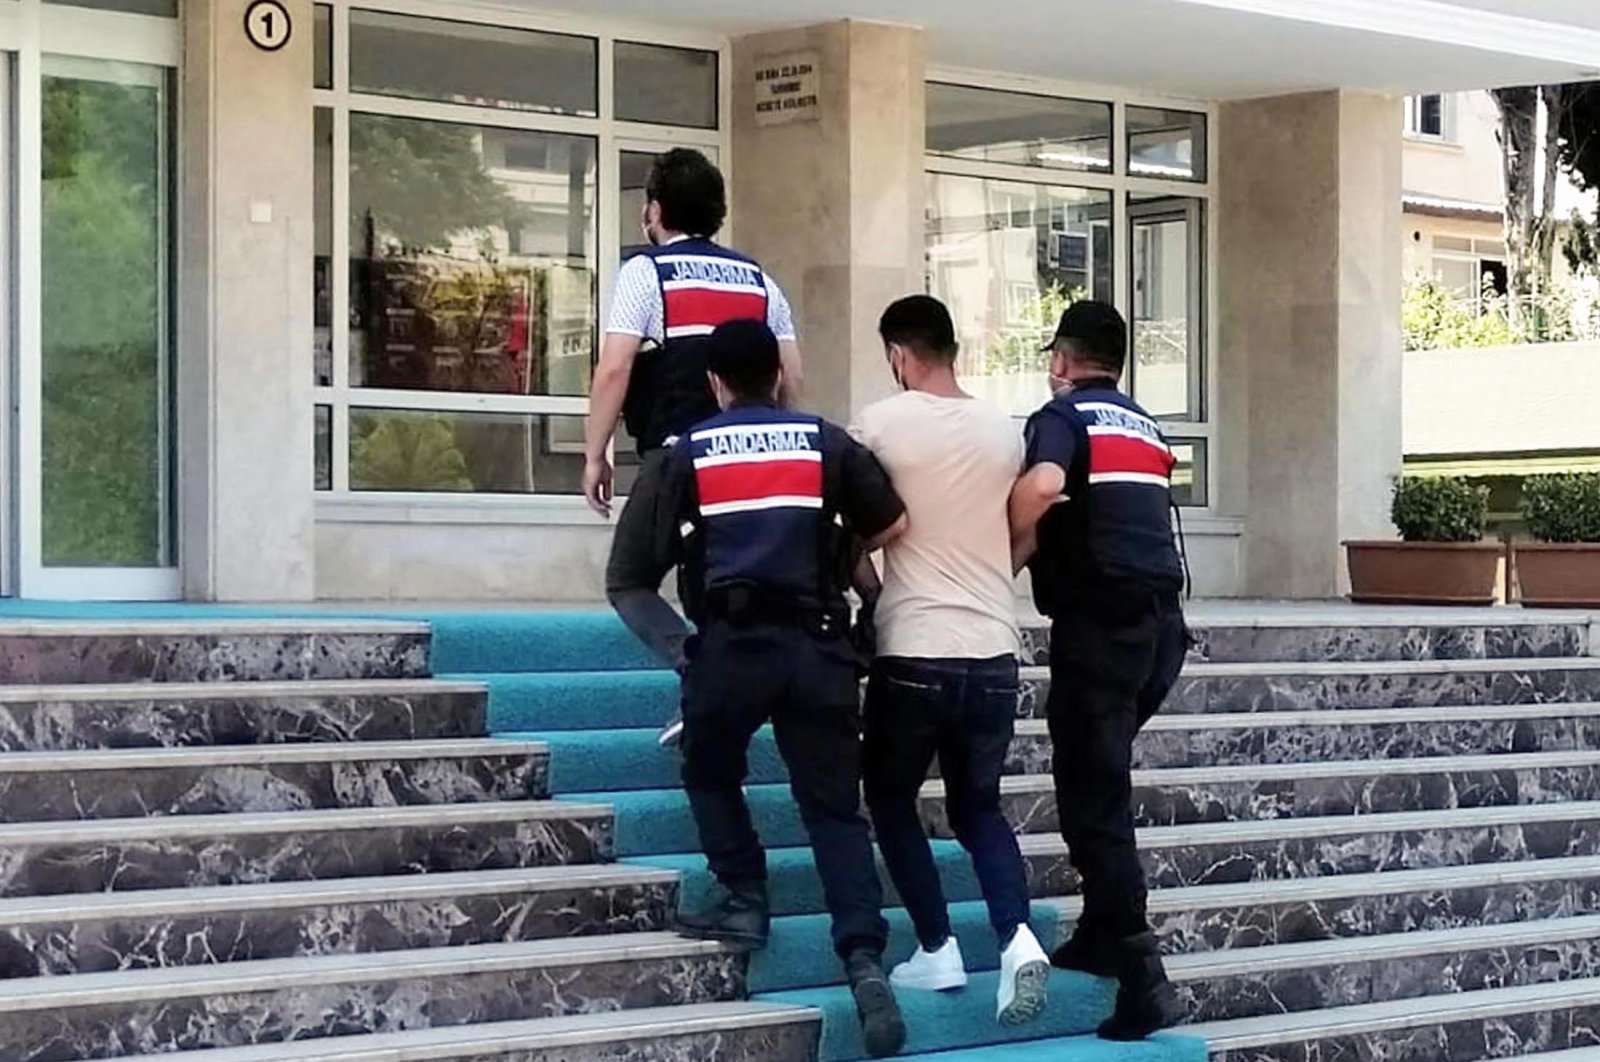 Gendarmerie forces escort a suspected Daesh terrorist to the gendarmerie command in Turkey's southern Mersin province, July 12, 2021. (IHA Photo)